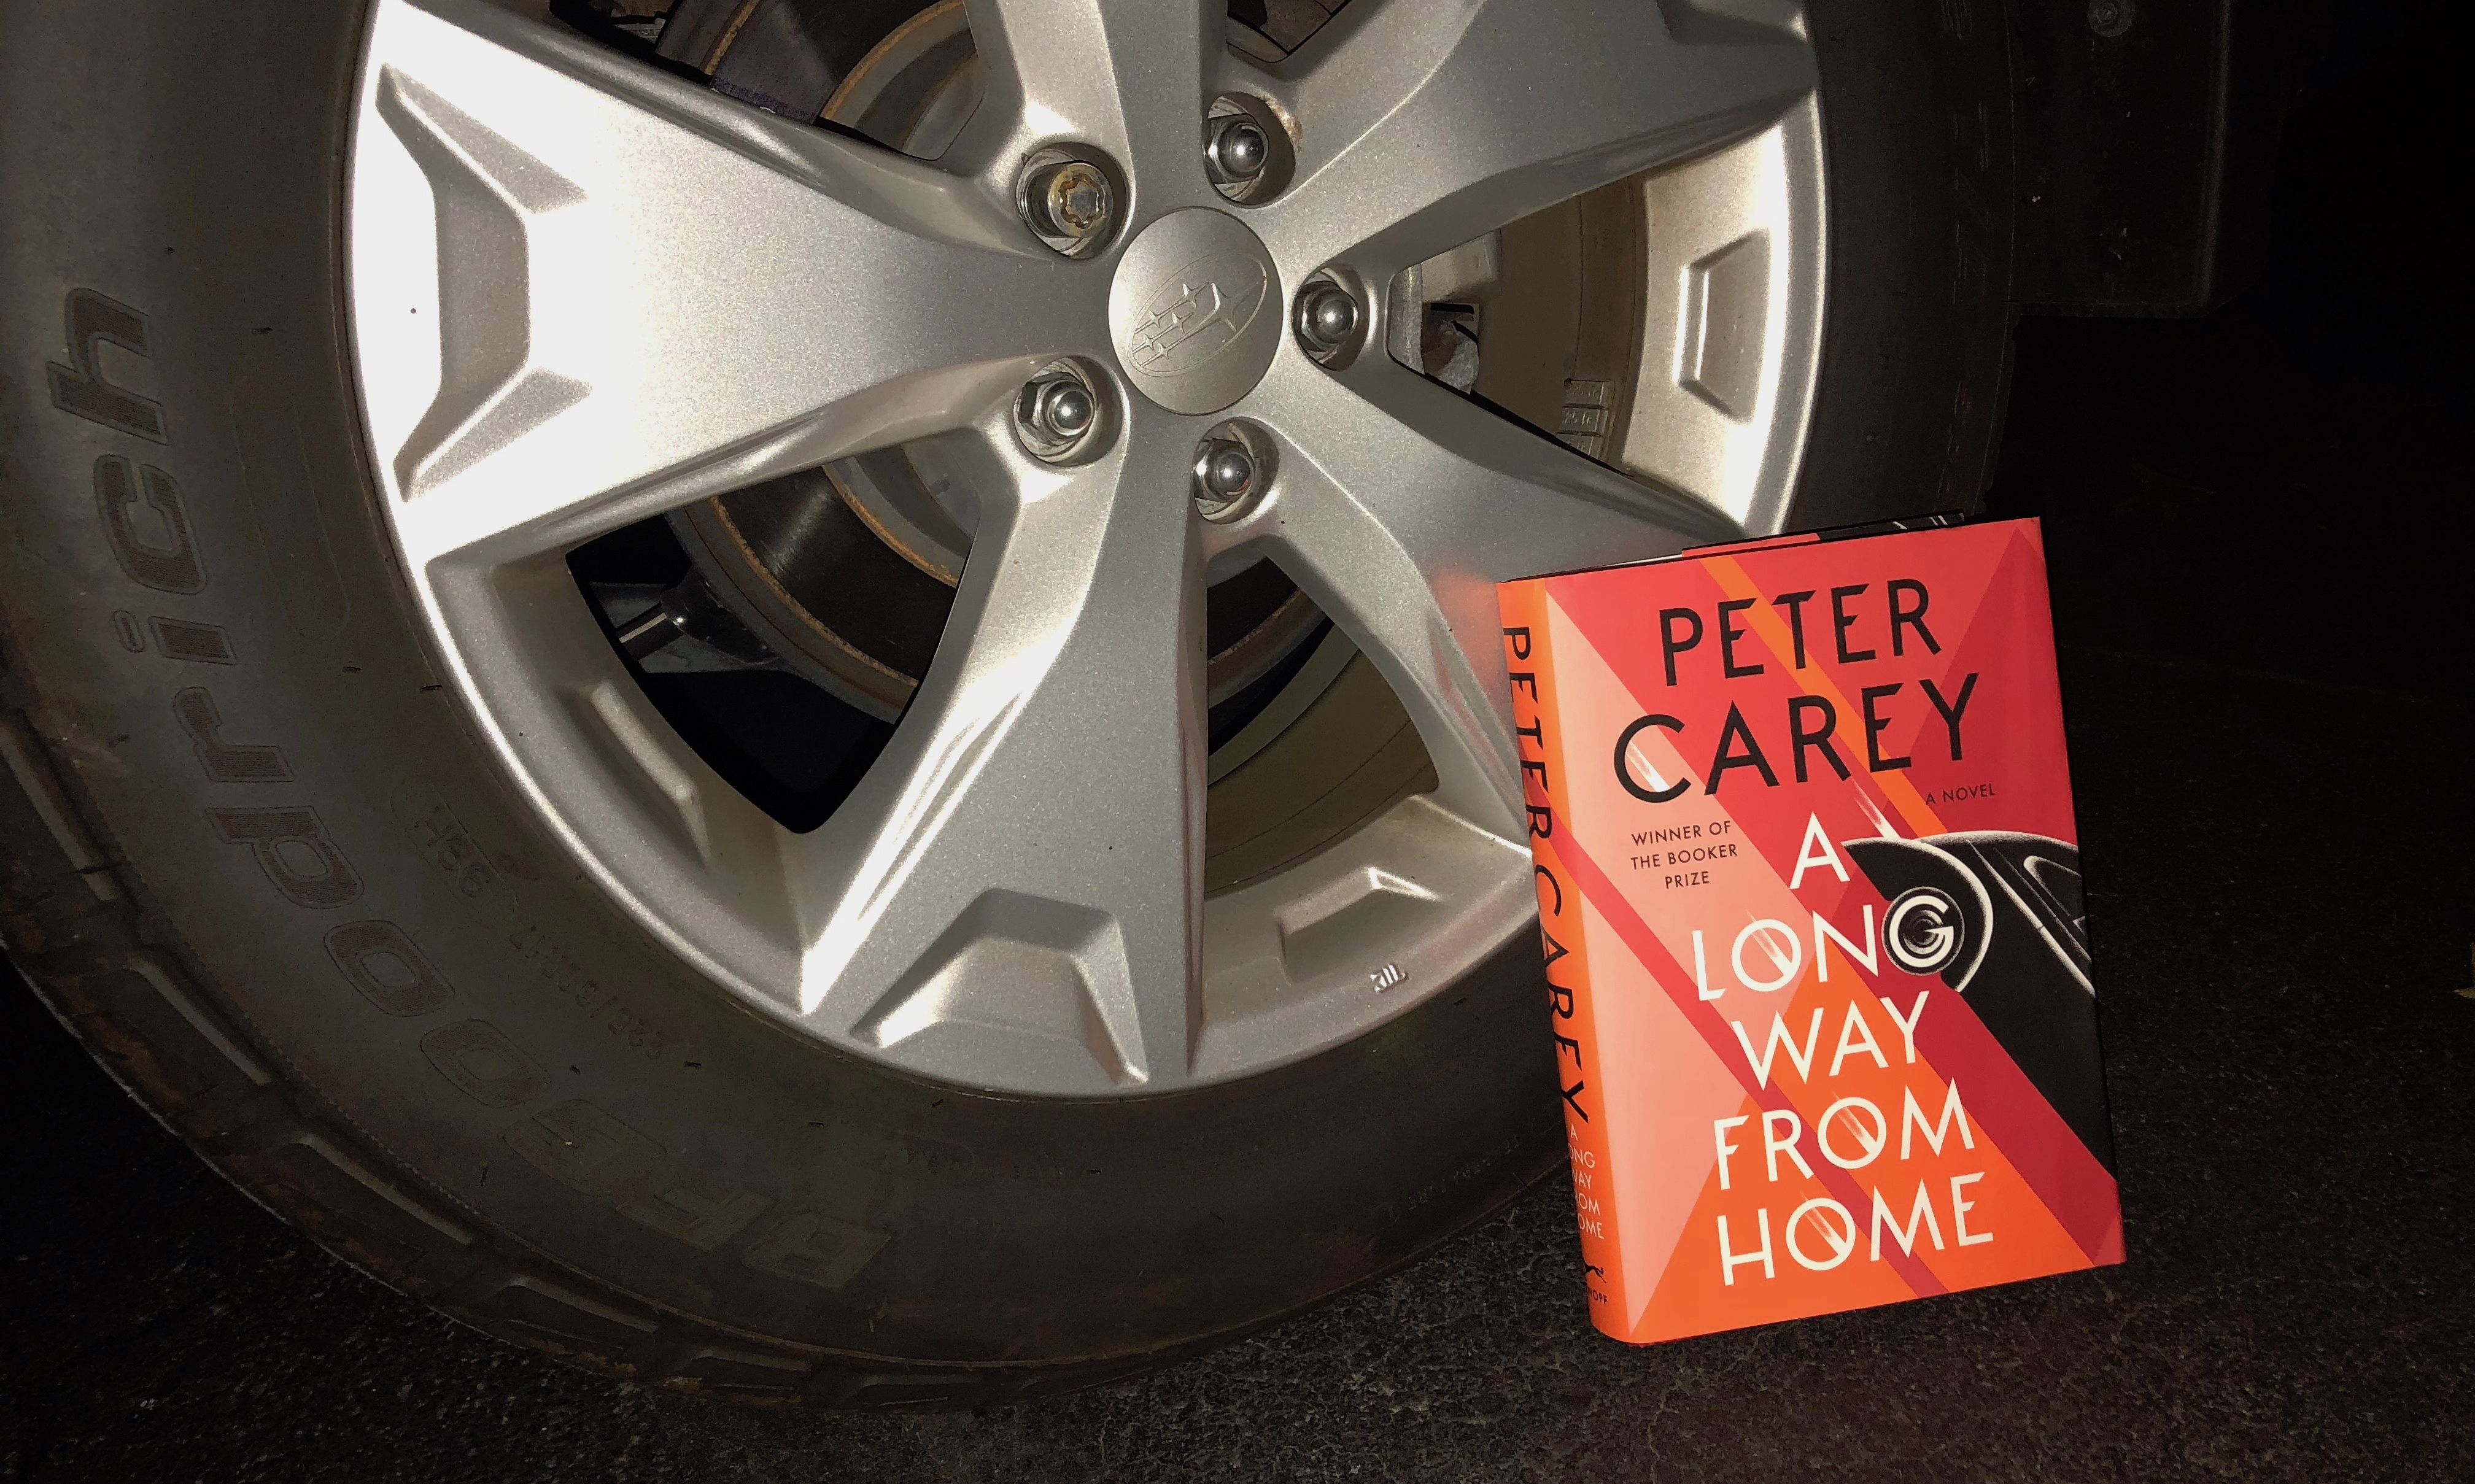 A Long Way From Home by Peter Carey